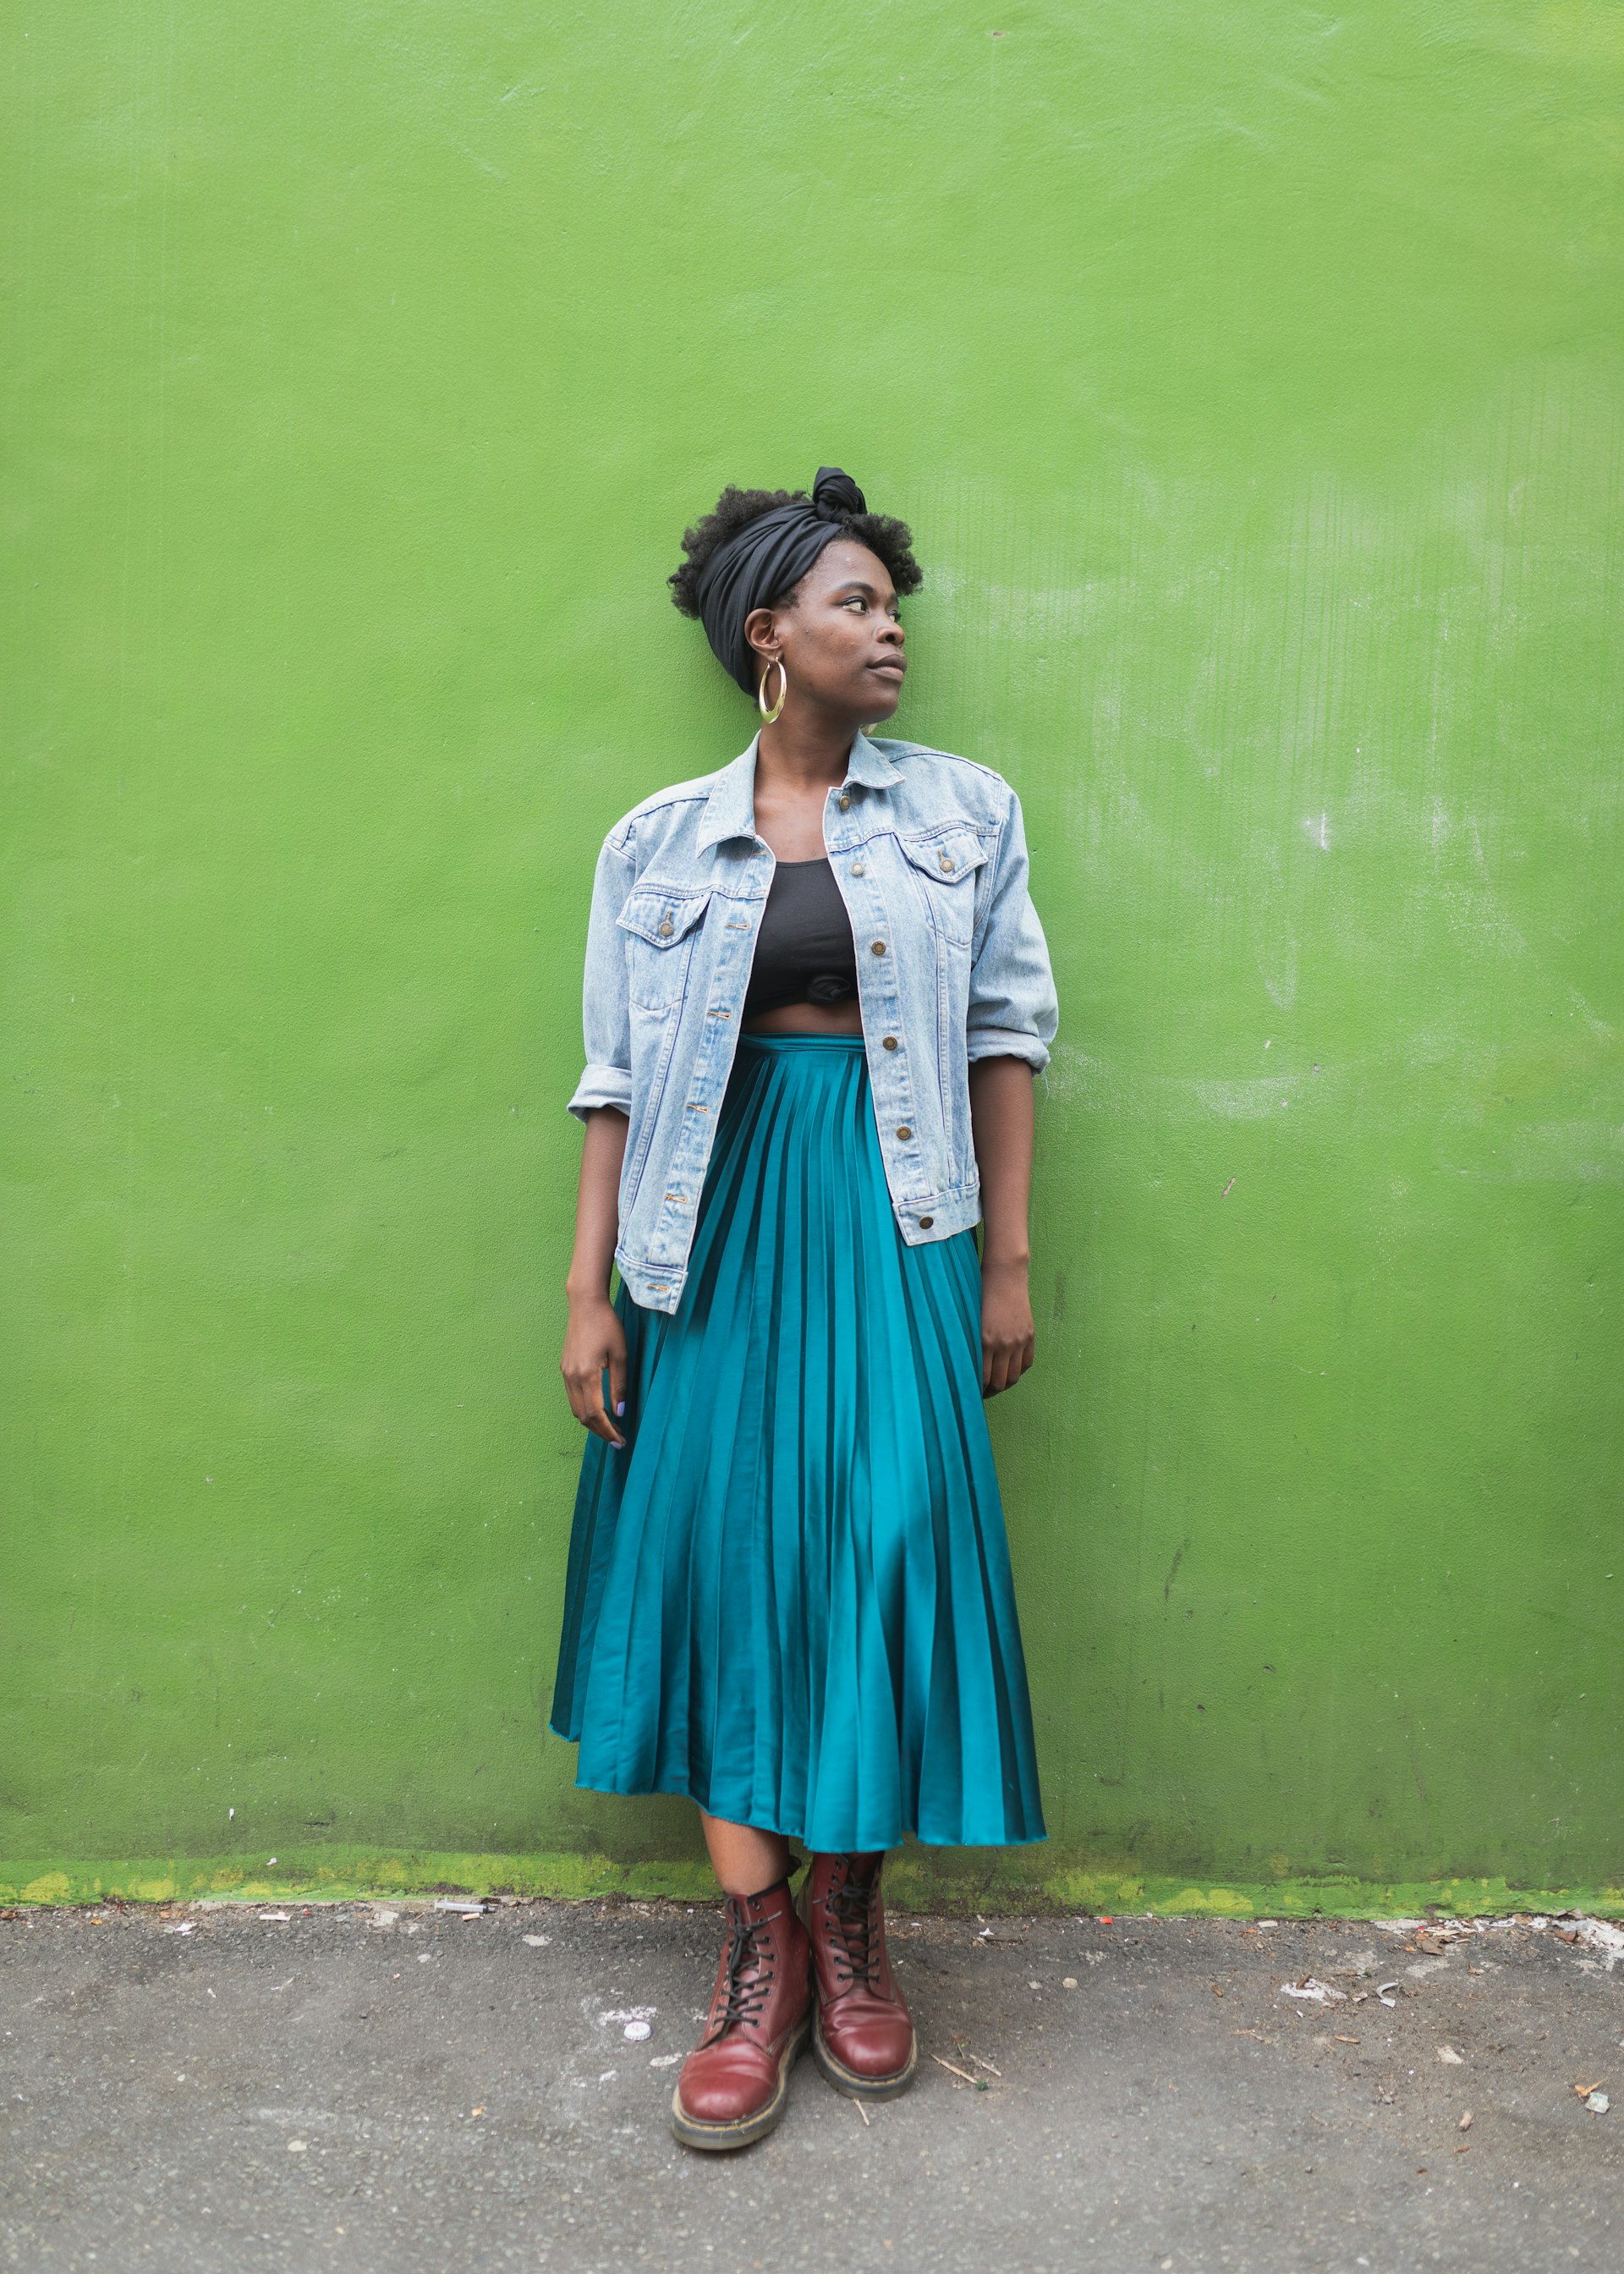 A black woman wearing a long skirt and denim jacket stands against a green wall